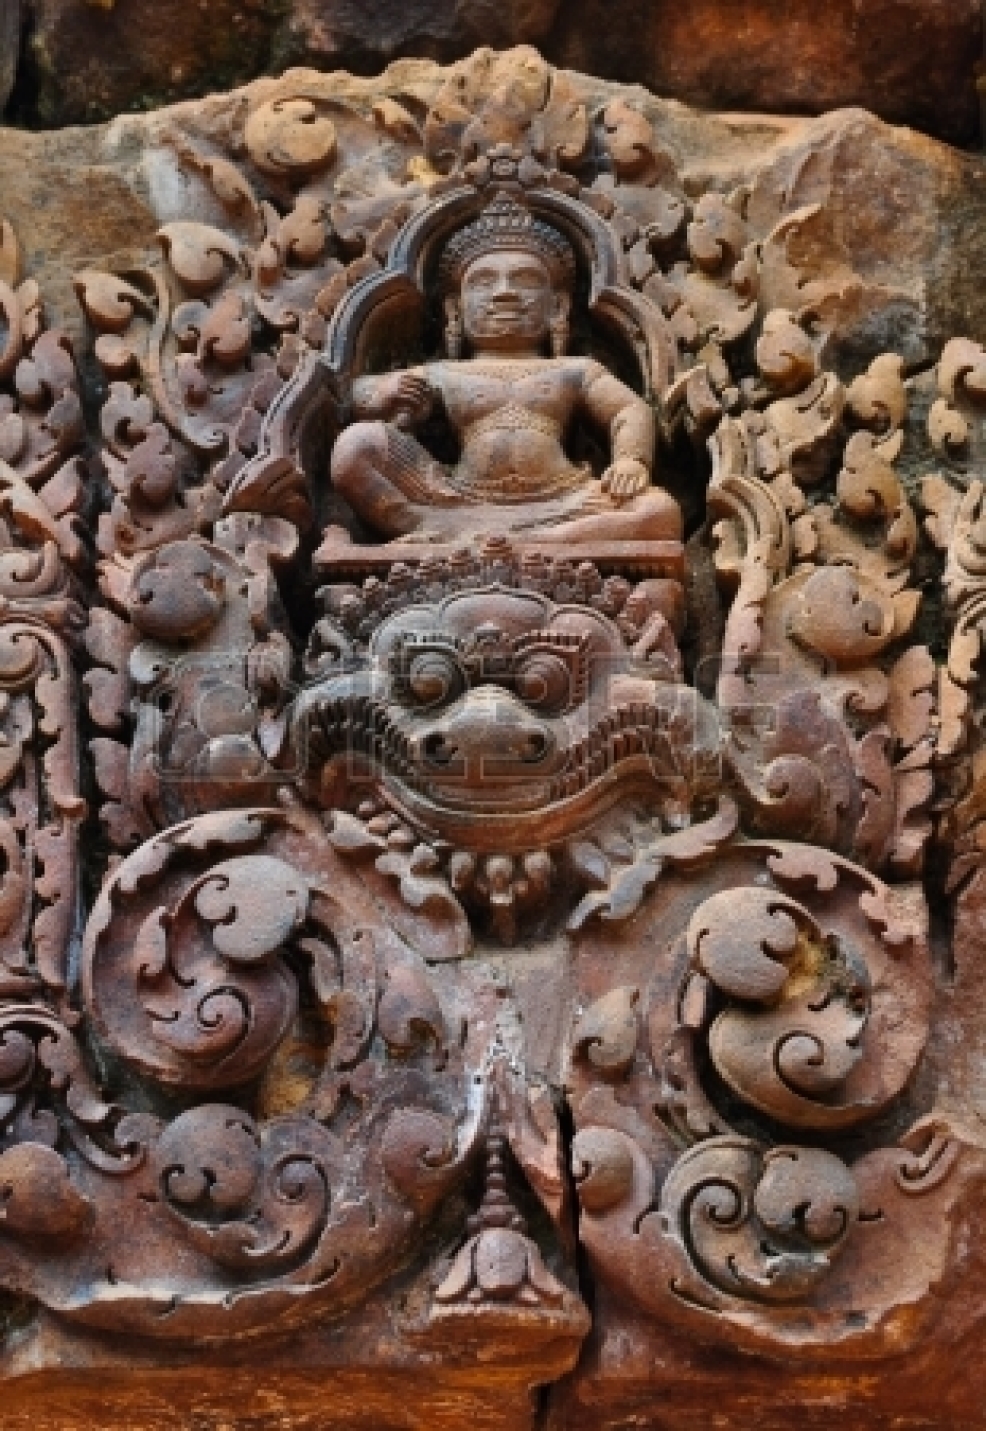 16428927-detail-of-beautiful-red-sandstone-reliefs-in-banteay-srei-temple-siem-reap--cambodia